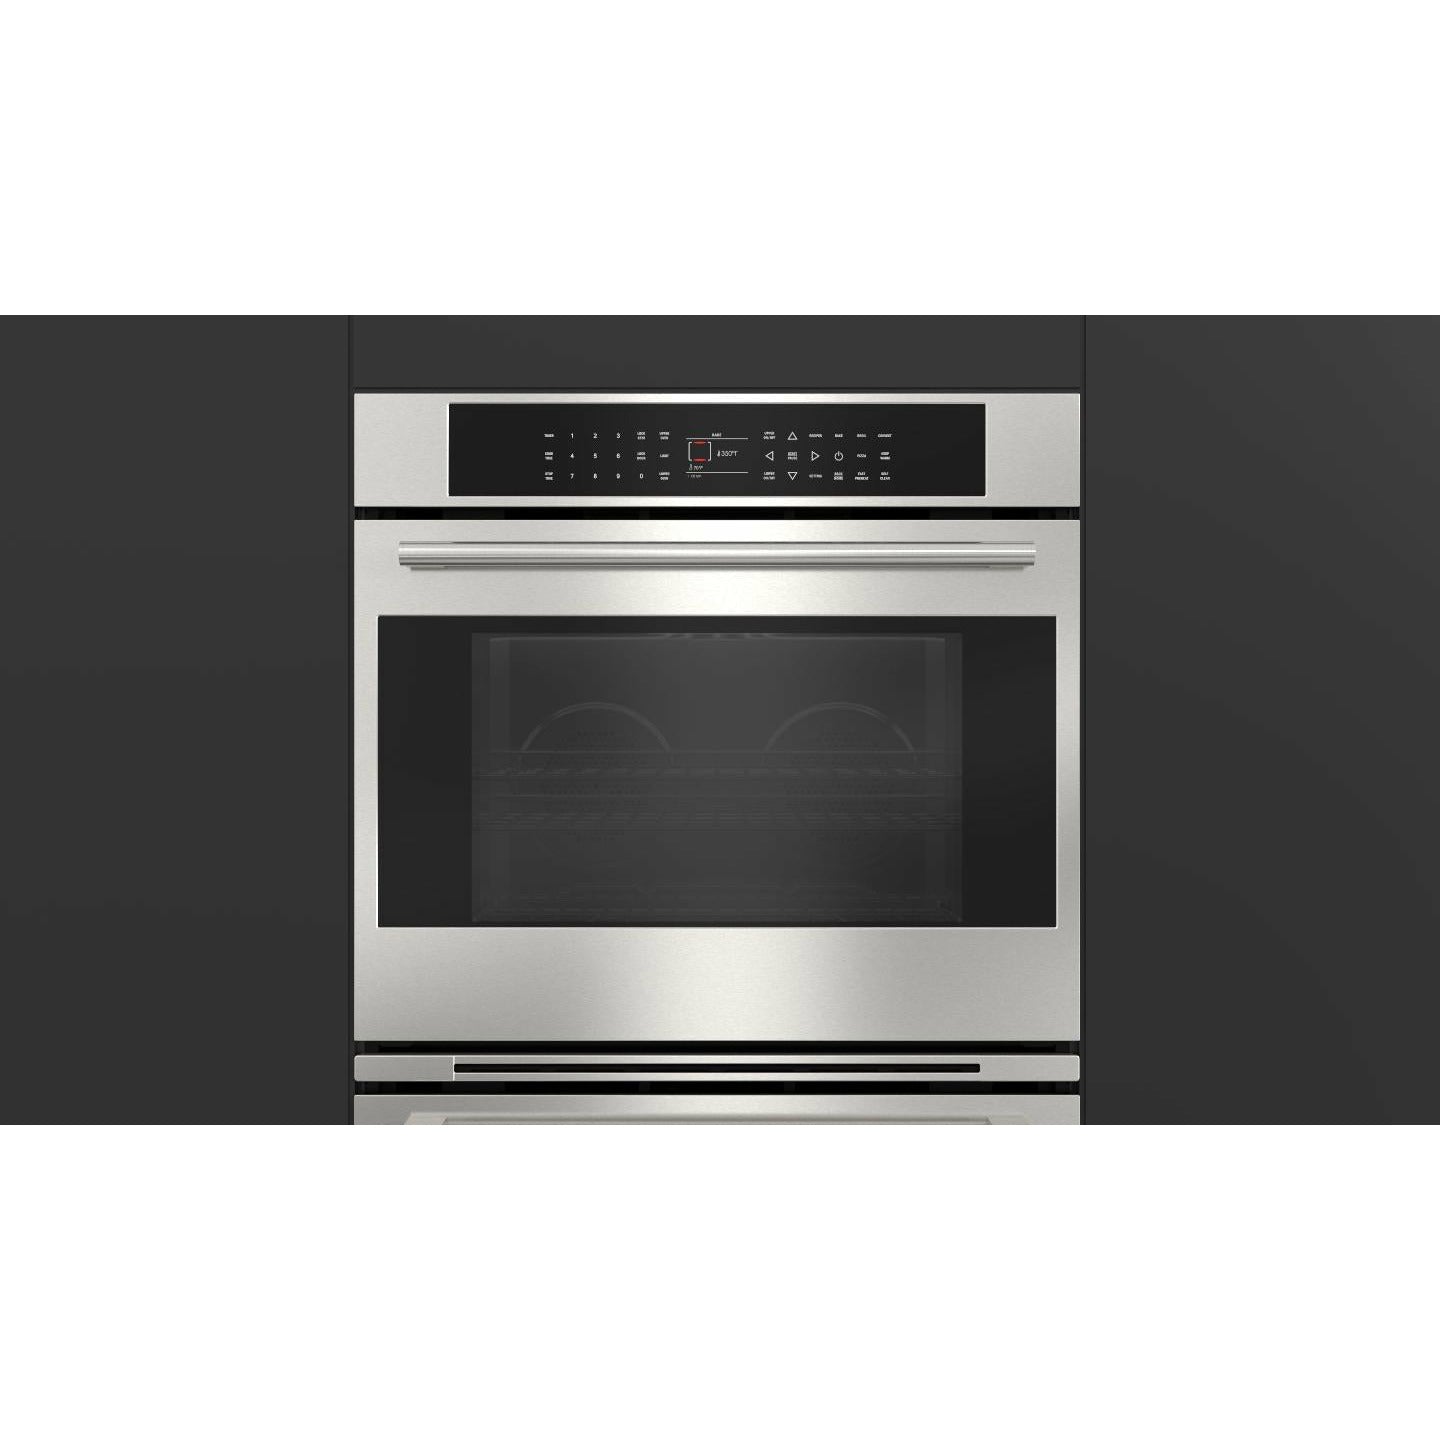 Fulgor Milano 30" Electric Double Wall Oven with 4.4 cu. ft. Capacity - F7DP301